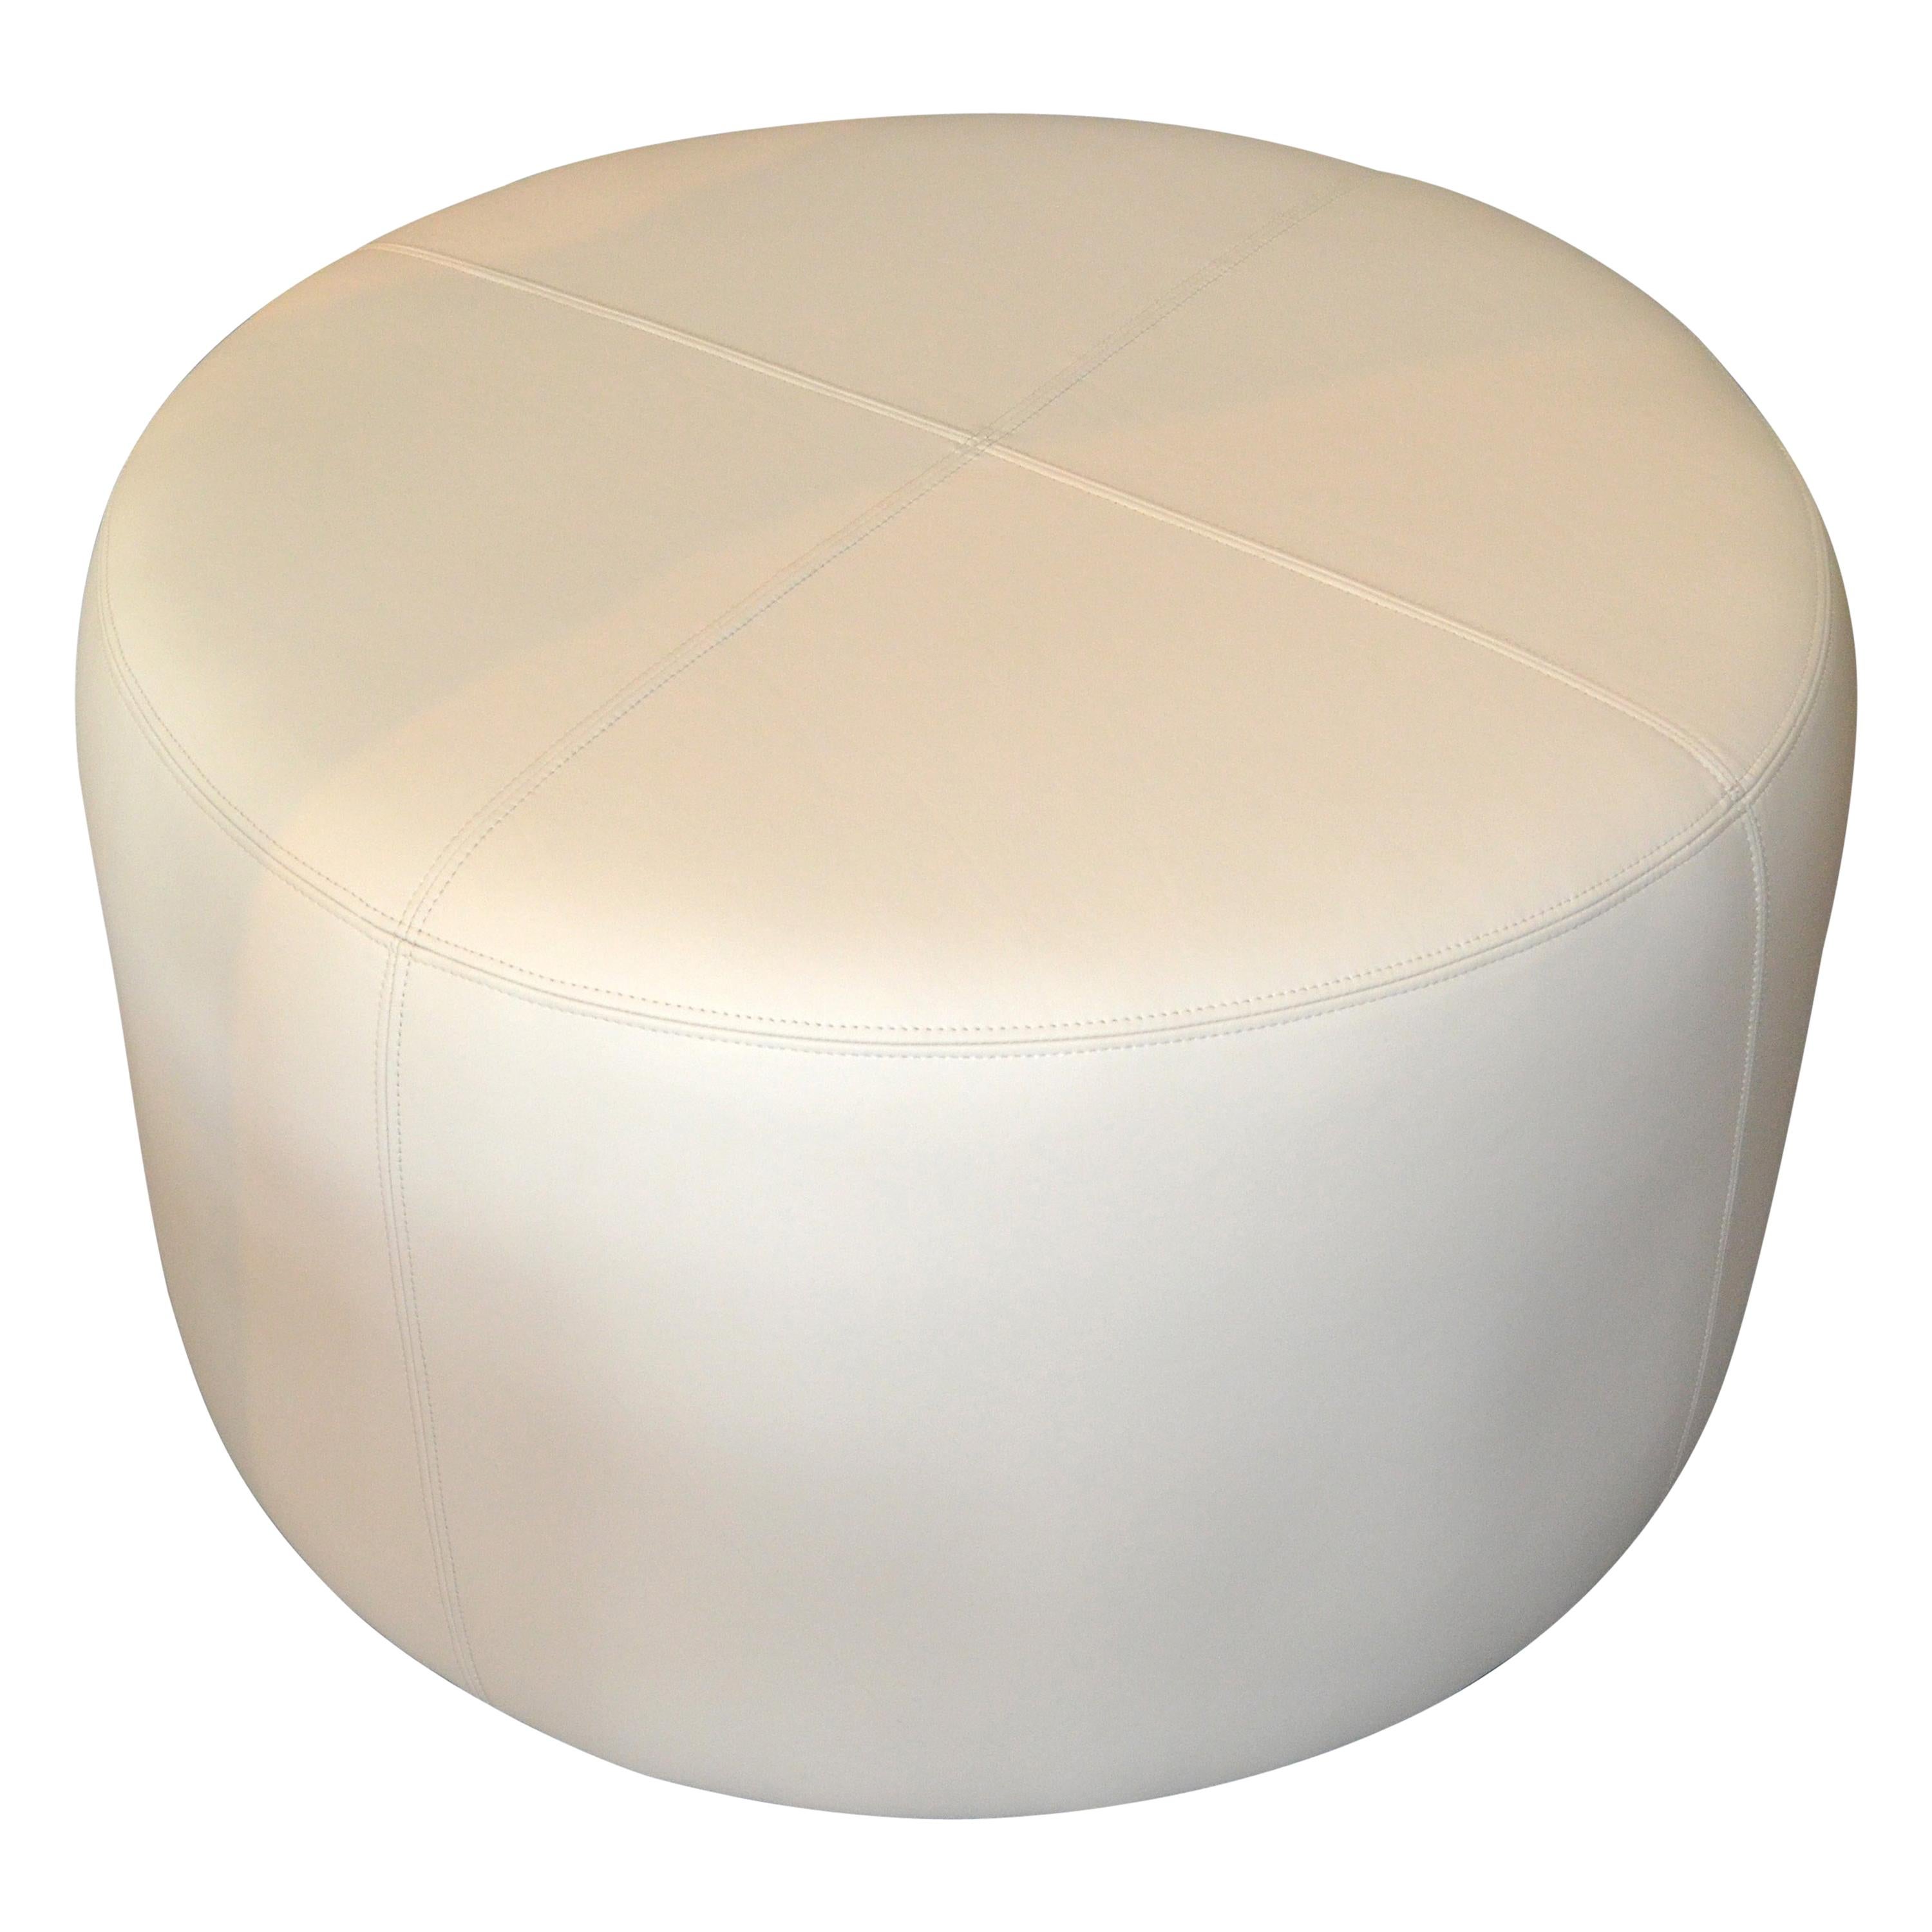 Modern Round Handcrafted Leather Ottoman, Pouf in Beige Leather, Contemporary